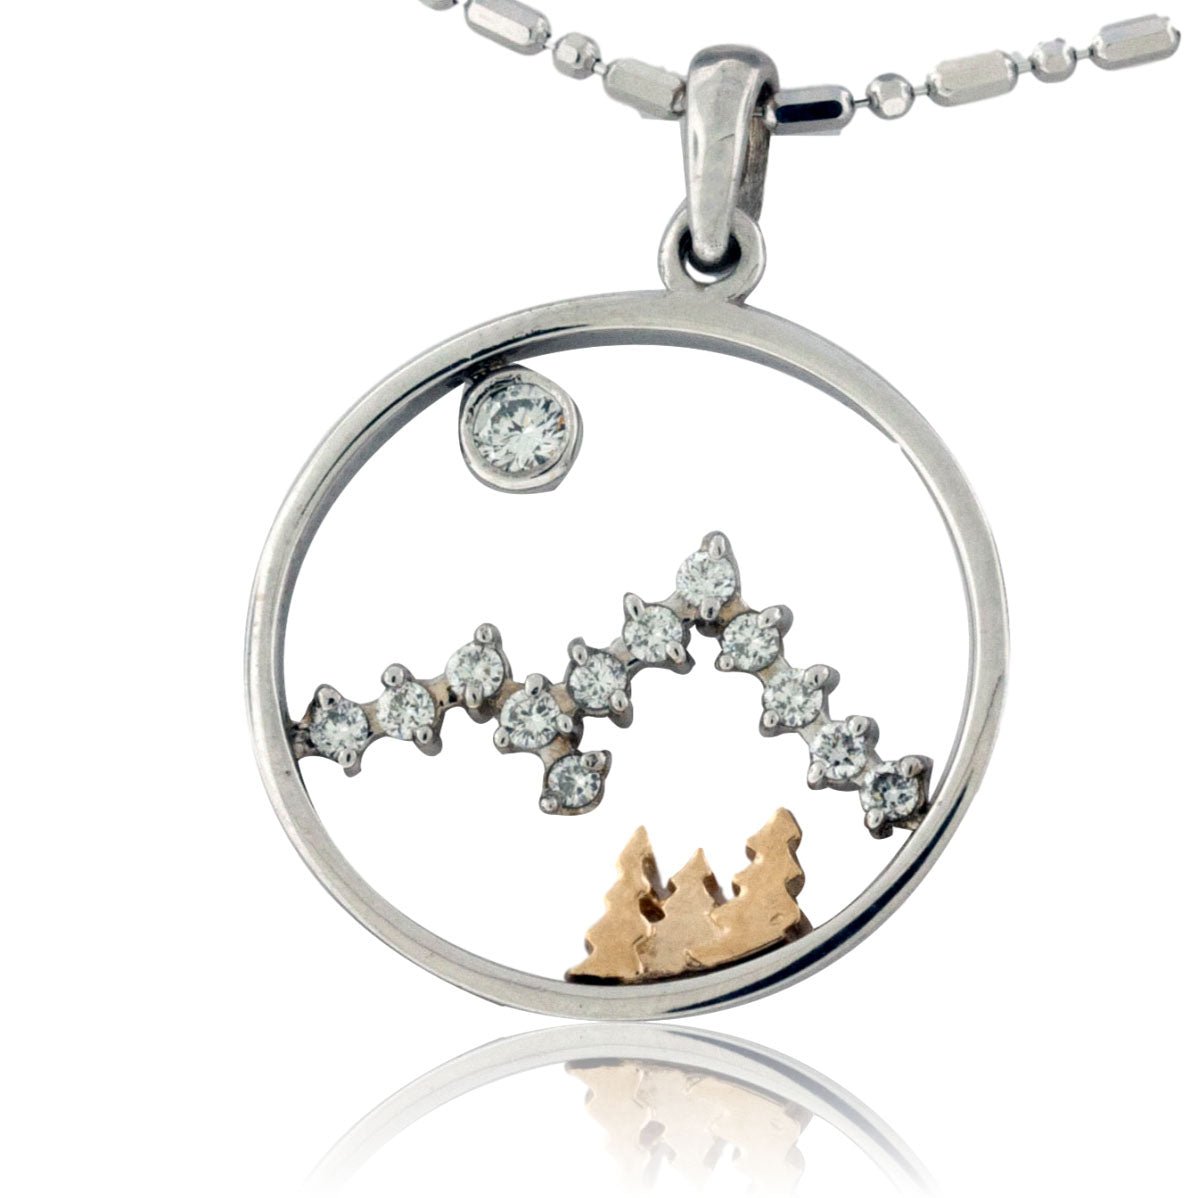 Buy Silver Moon & Star Necklace Online - Accessorize India